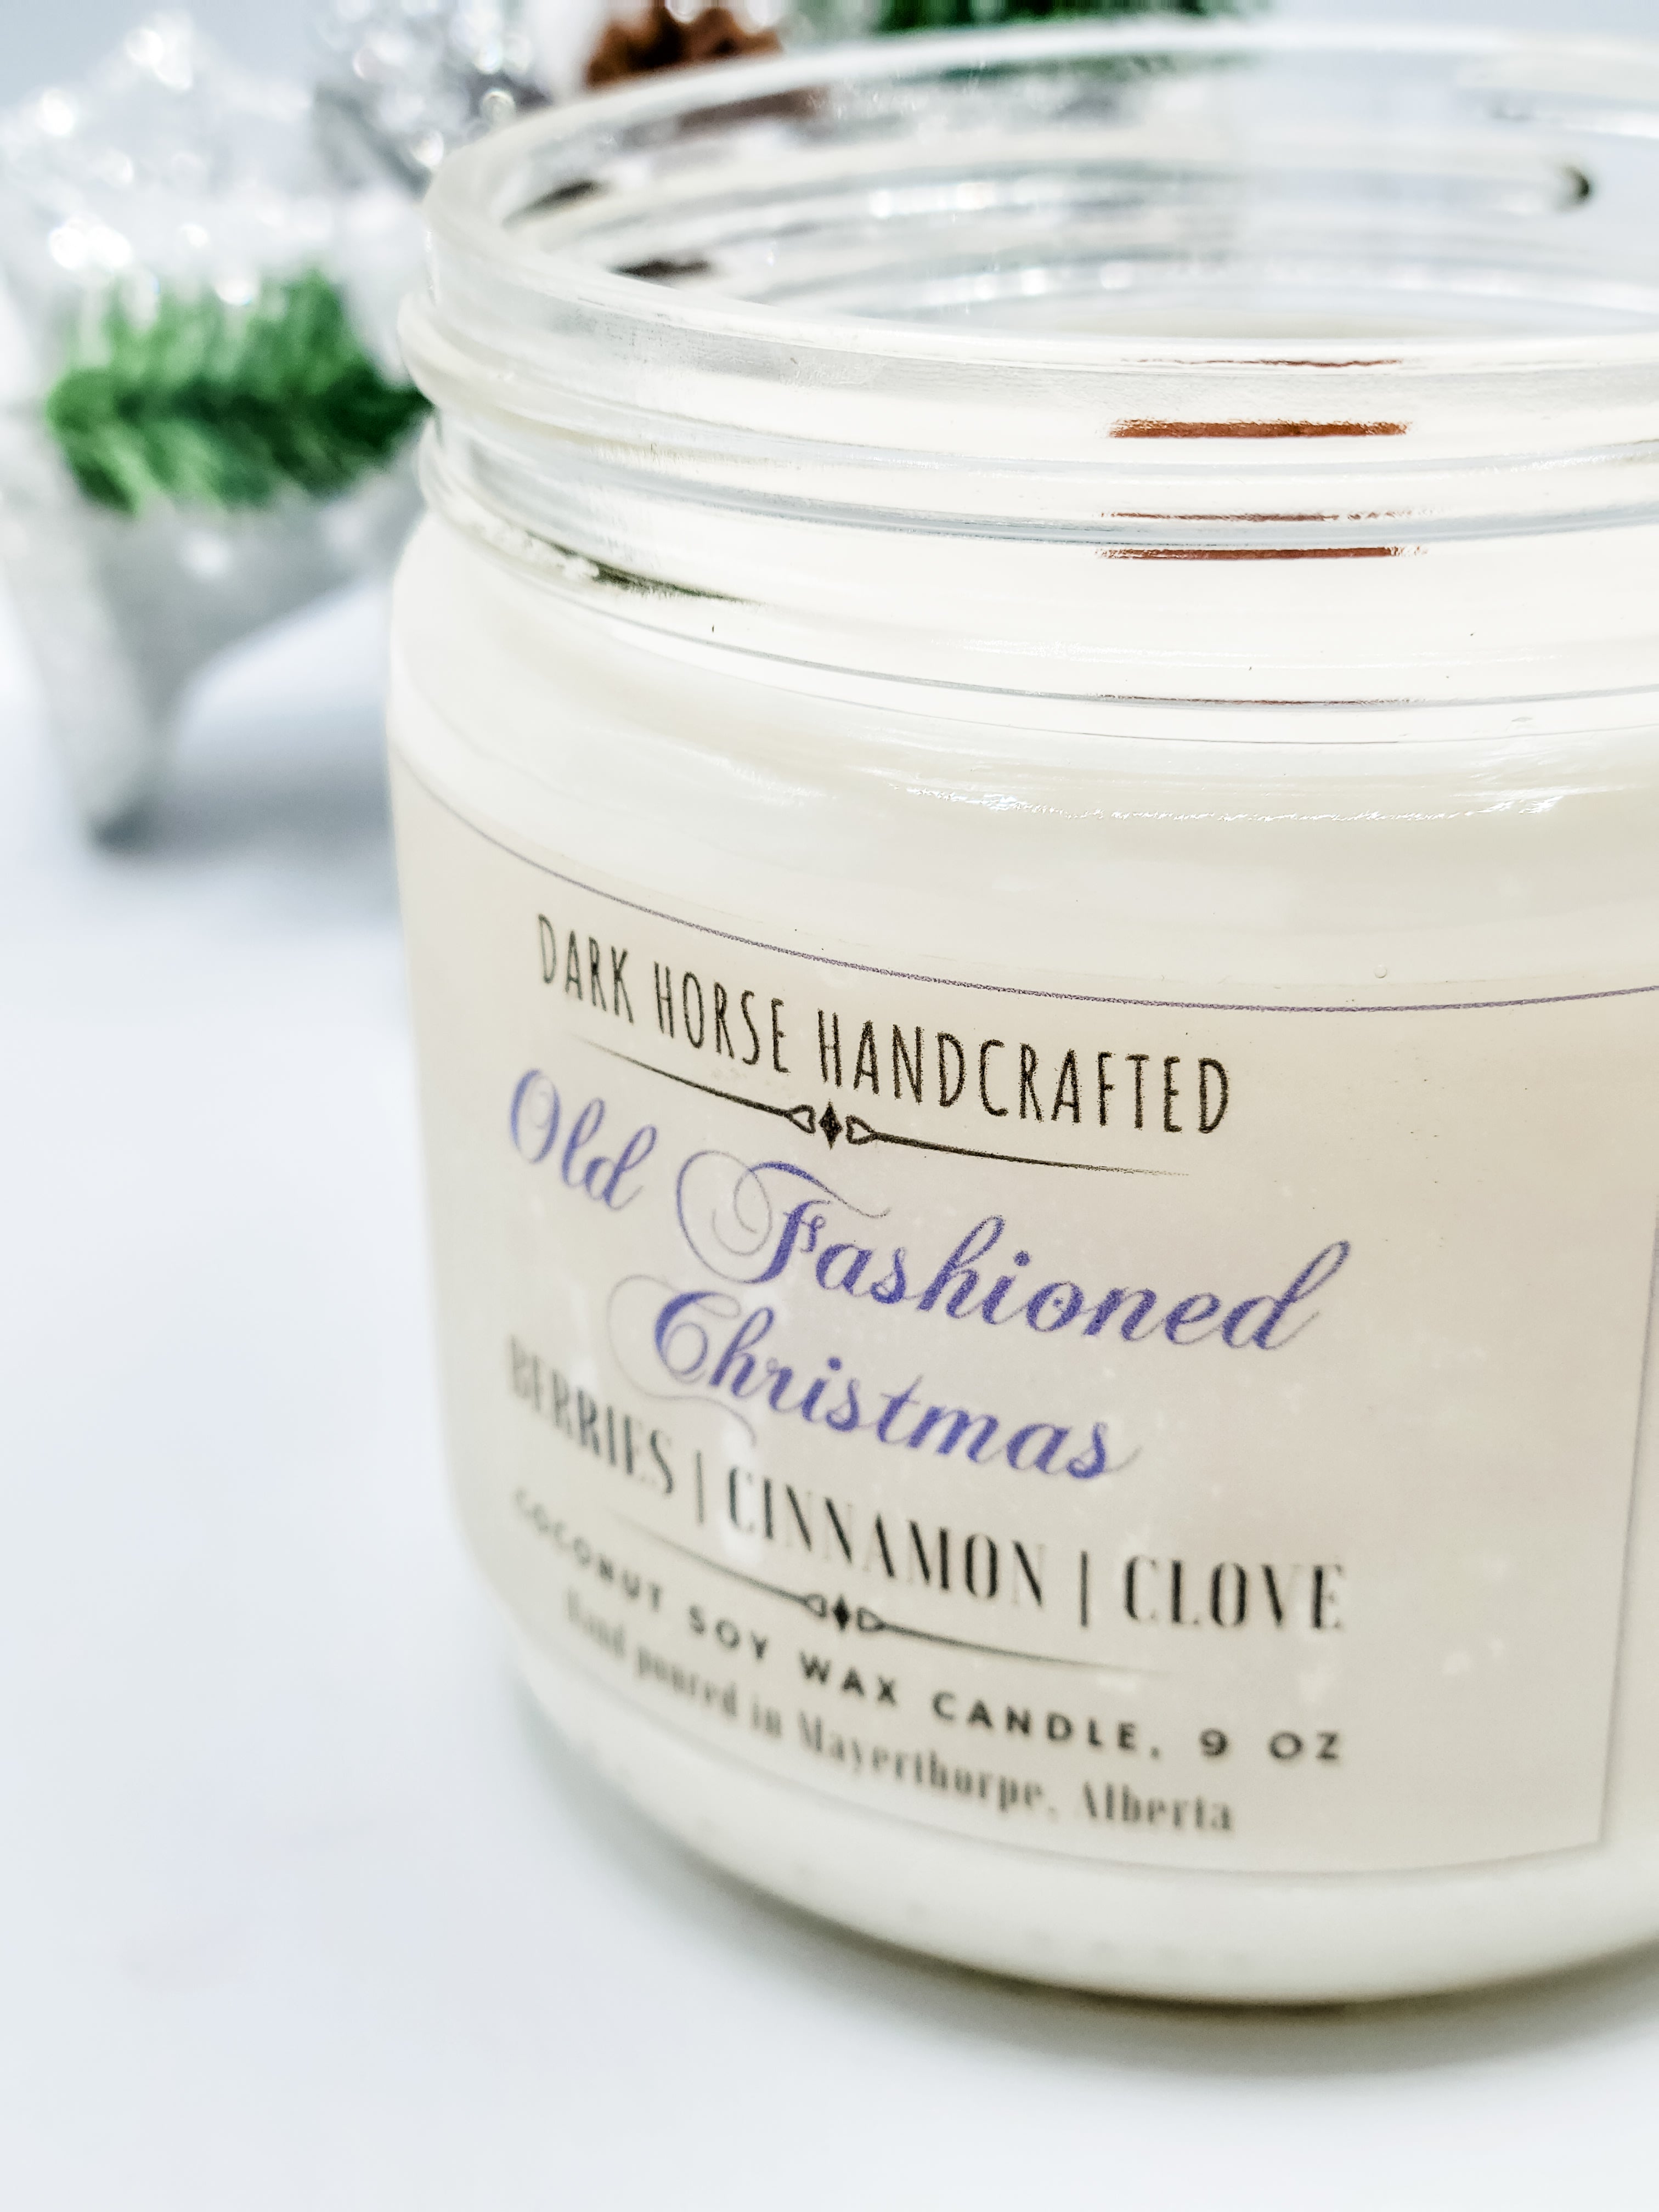 Old Fashioned Christmas - Soy Candle